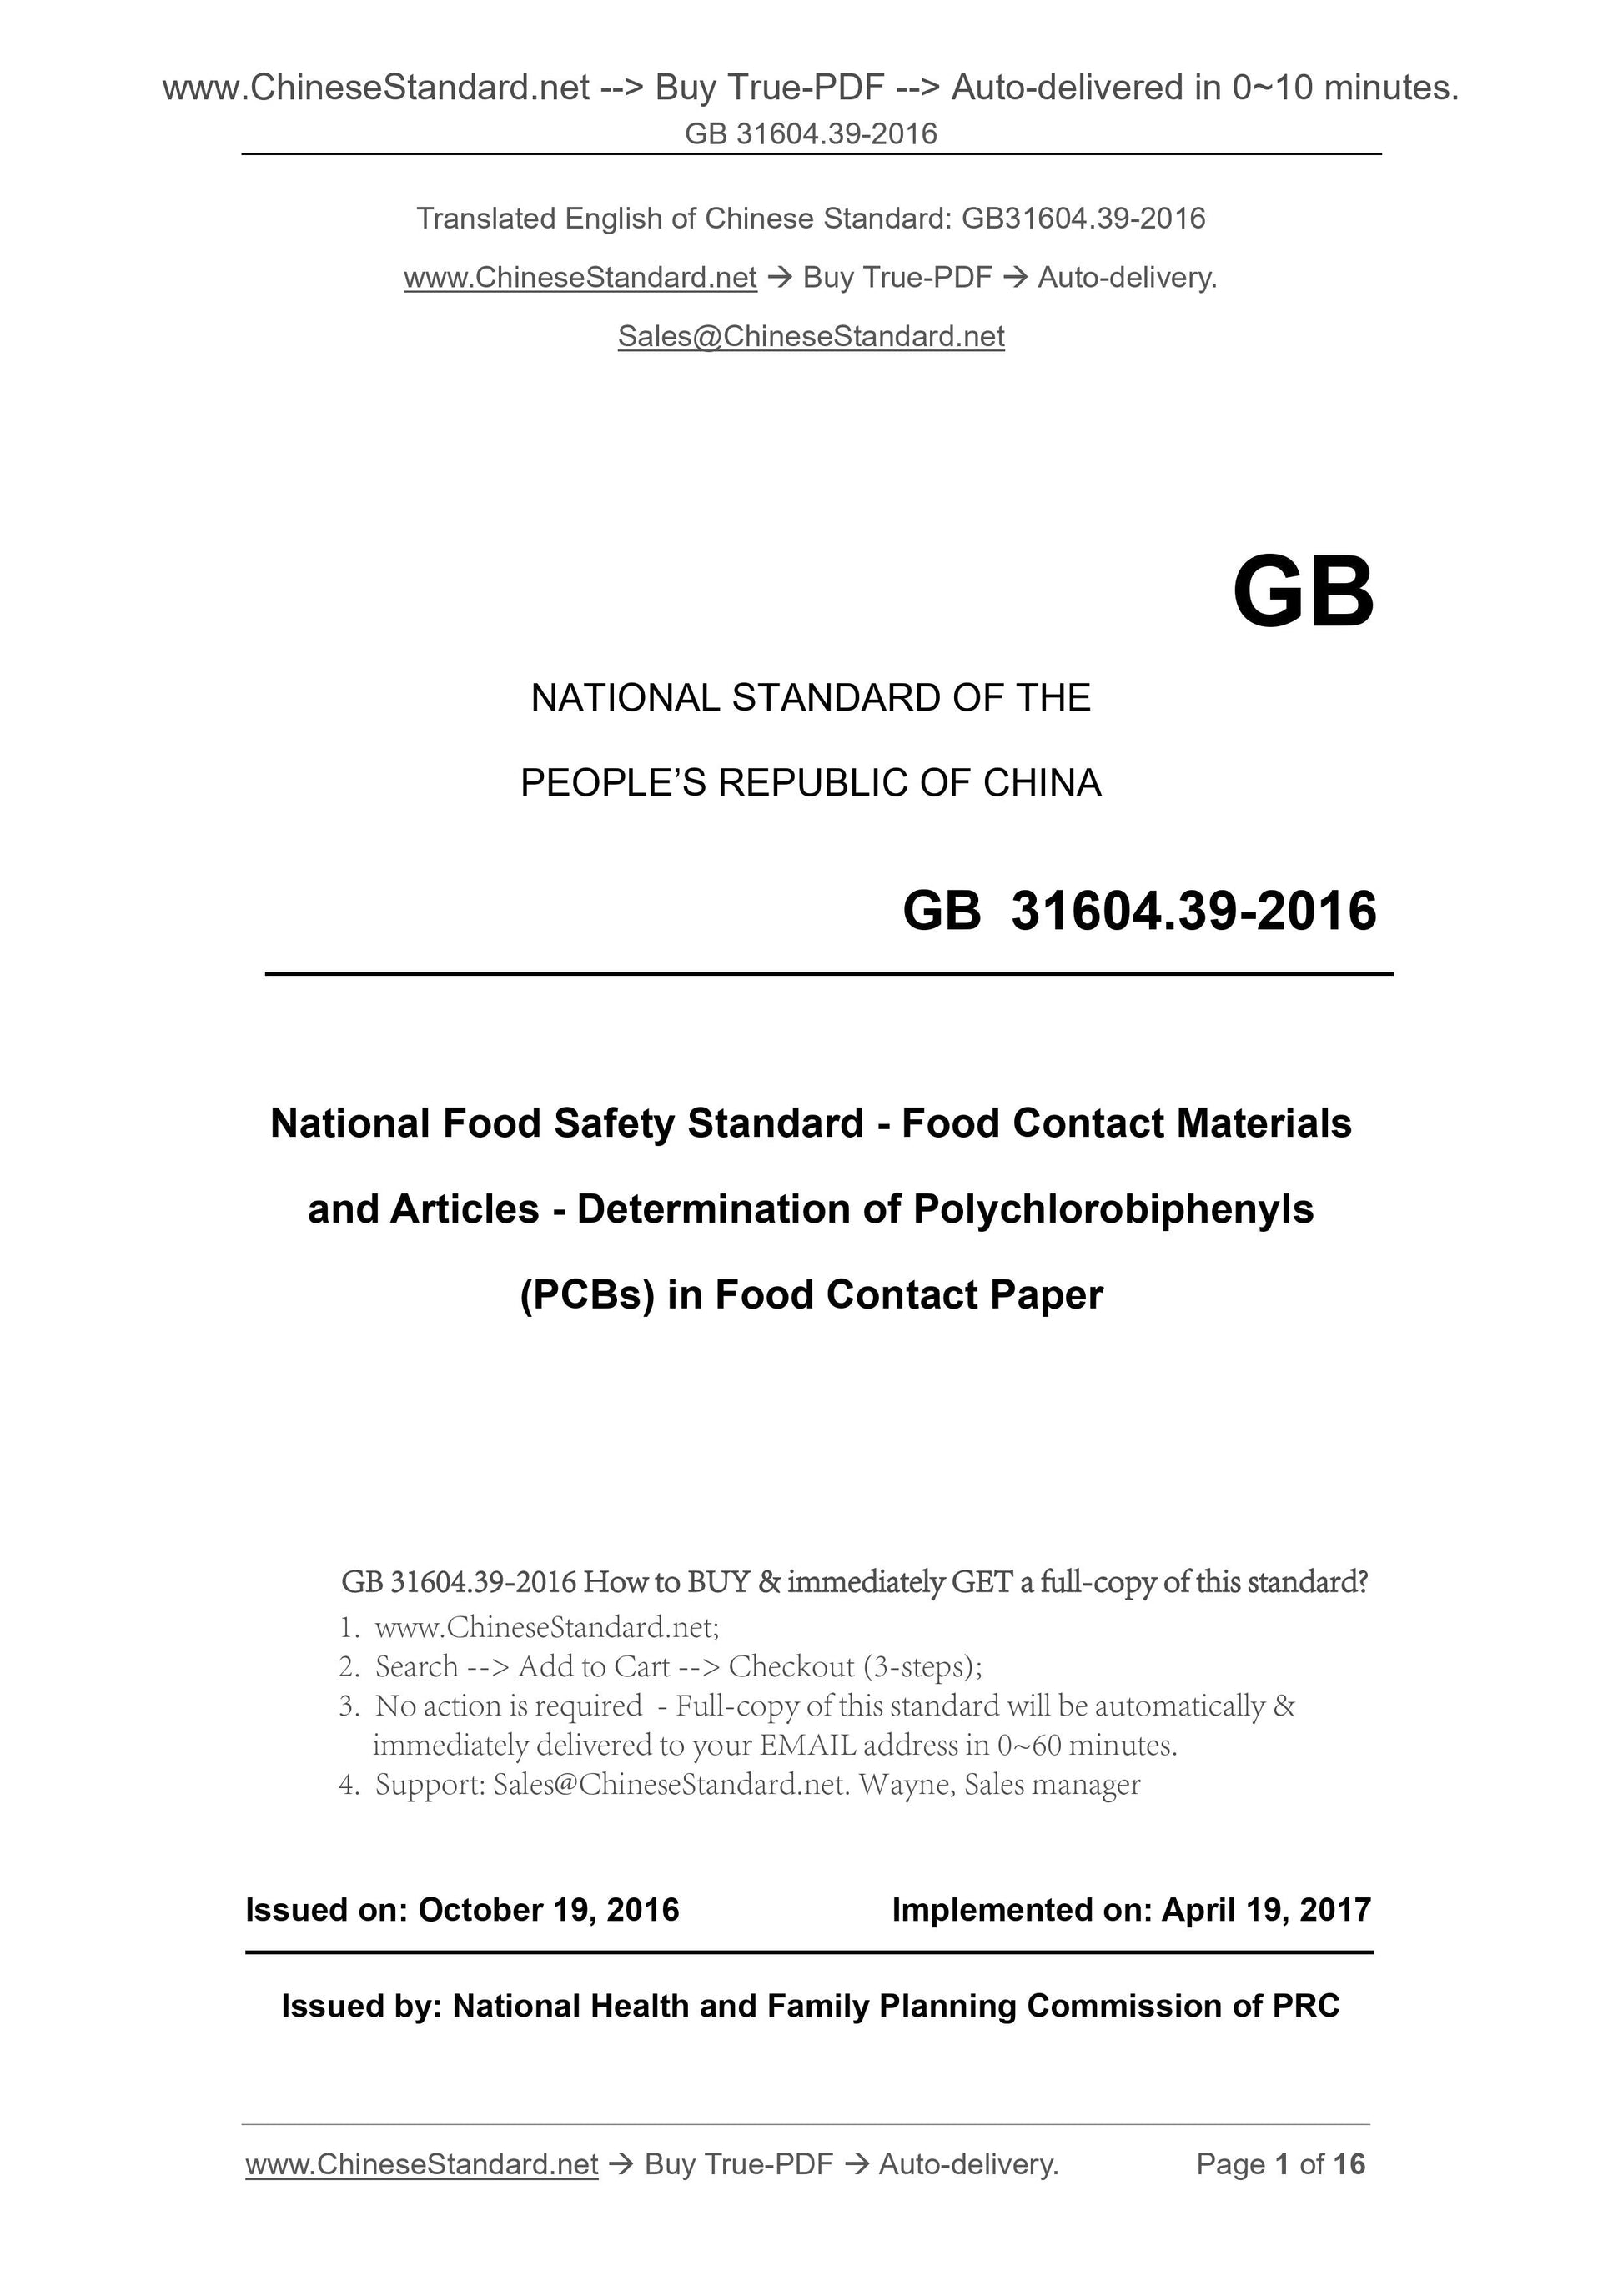 GB 31604.39-2016 Page 1